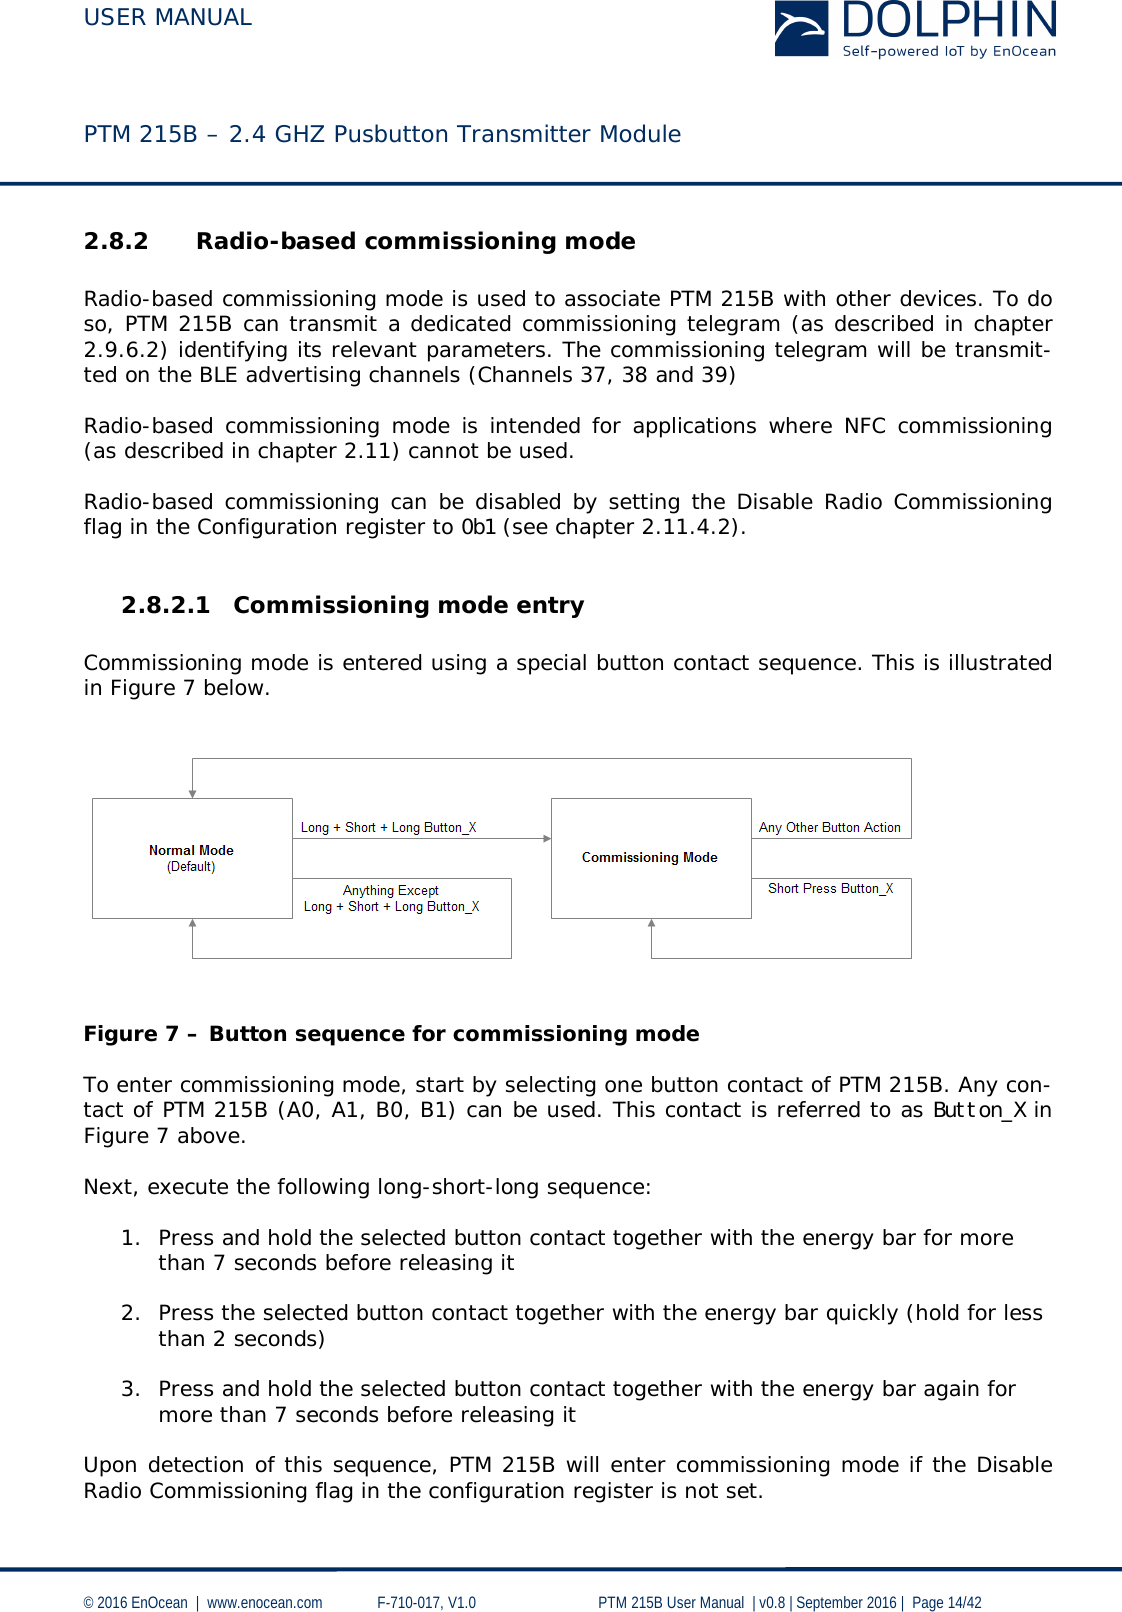  USER MANUAL    PTM 215B – 2.4 GHZ Pusbutton Transmitter Module  © 2016 EnOcean  |  www.enocean.com   F-710-017, V1.0        PTM 215B User Manual  | v0.8 | September 2016 |  Page 14/42  2.8.2 Radio-based commissioning mode   Radio-based commissioning mode is used to associate PTM 215B with other devices. To do so, PTM 215B can transmit a dedicated commissioning telegram (as described in chapter 2.9.6.2) identifying its relevant parameters. The commissioning telegram will be transmit-ted on the BLE advertising channels (Channels 37, 38 and 39)  Radio-based commissioning mode is intended for applications where NFC commissioning (as described in chapter 2.11) cannot be used.  Radio-based commissioning can be disabled by setting the Disable Radio Commissioning flag in the Configuration register to 0b1 (see chapter 2.11.4.2).   2.8.2.1 Commissioning mode entry  Commissioning mode is entered using a special button contact sequence. This is illustrated in Figure 7 below.      Figure 7 – Button sequence for commissioning mode  To enter commissioning mode, start by selecting one button contact of PTM 215B. Any con-tact of PTM 215B (A0, A1, B0, B1) can be used. This contact is referred to as Button_X in Figure 7 above.  Next, execute the following long-short-long sequence:  1. Press and hold the selected button contact together with the energy bar for more than 7 seconds before releasing it  2. Press the selected button contact together with the energy bar quickly (hold for less than 2 seconds)  3. Press and hold the selected button contact together with the energy bar again for more than 7 seconds before releasing it  Upon detection of this sequence, PTM 215B will enter commissioning mode if the Disable Radio Commissioning flag in the configuration register is not set. 